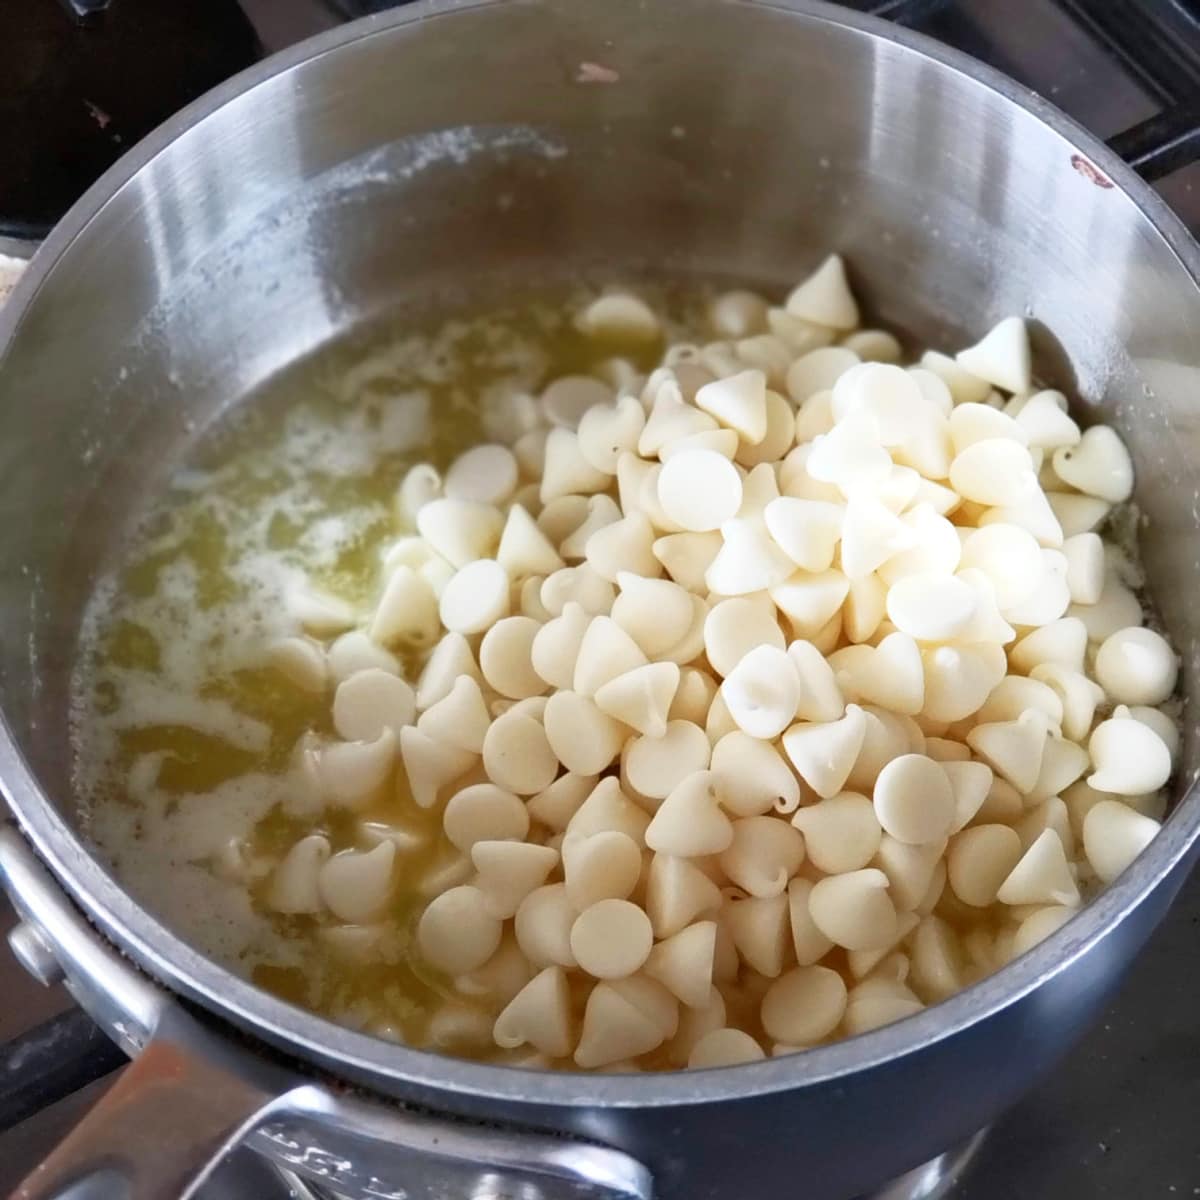 Butter and white chocolate melting on the stove in a small silver pot